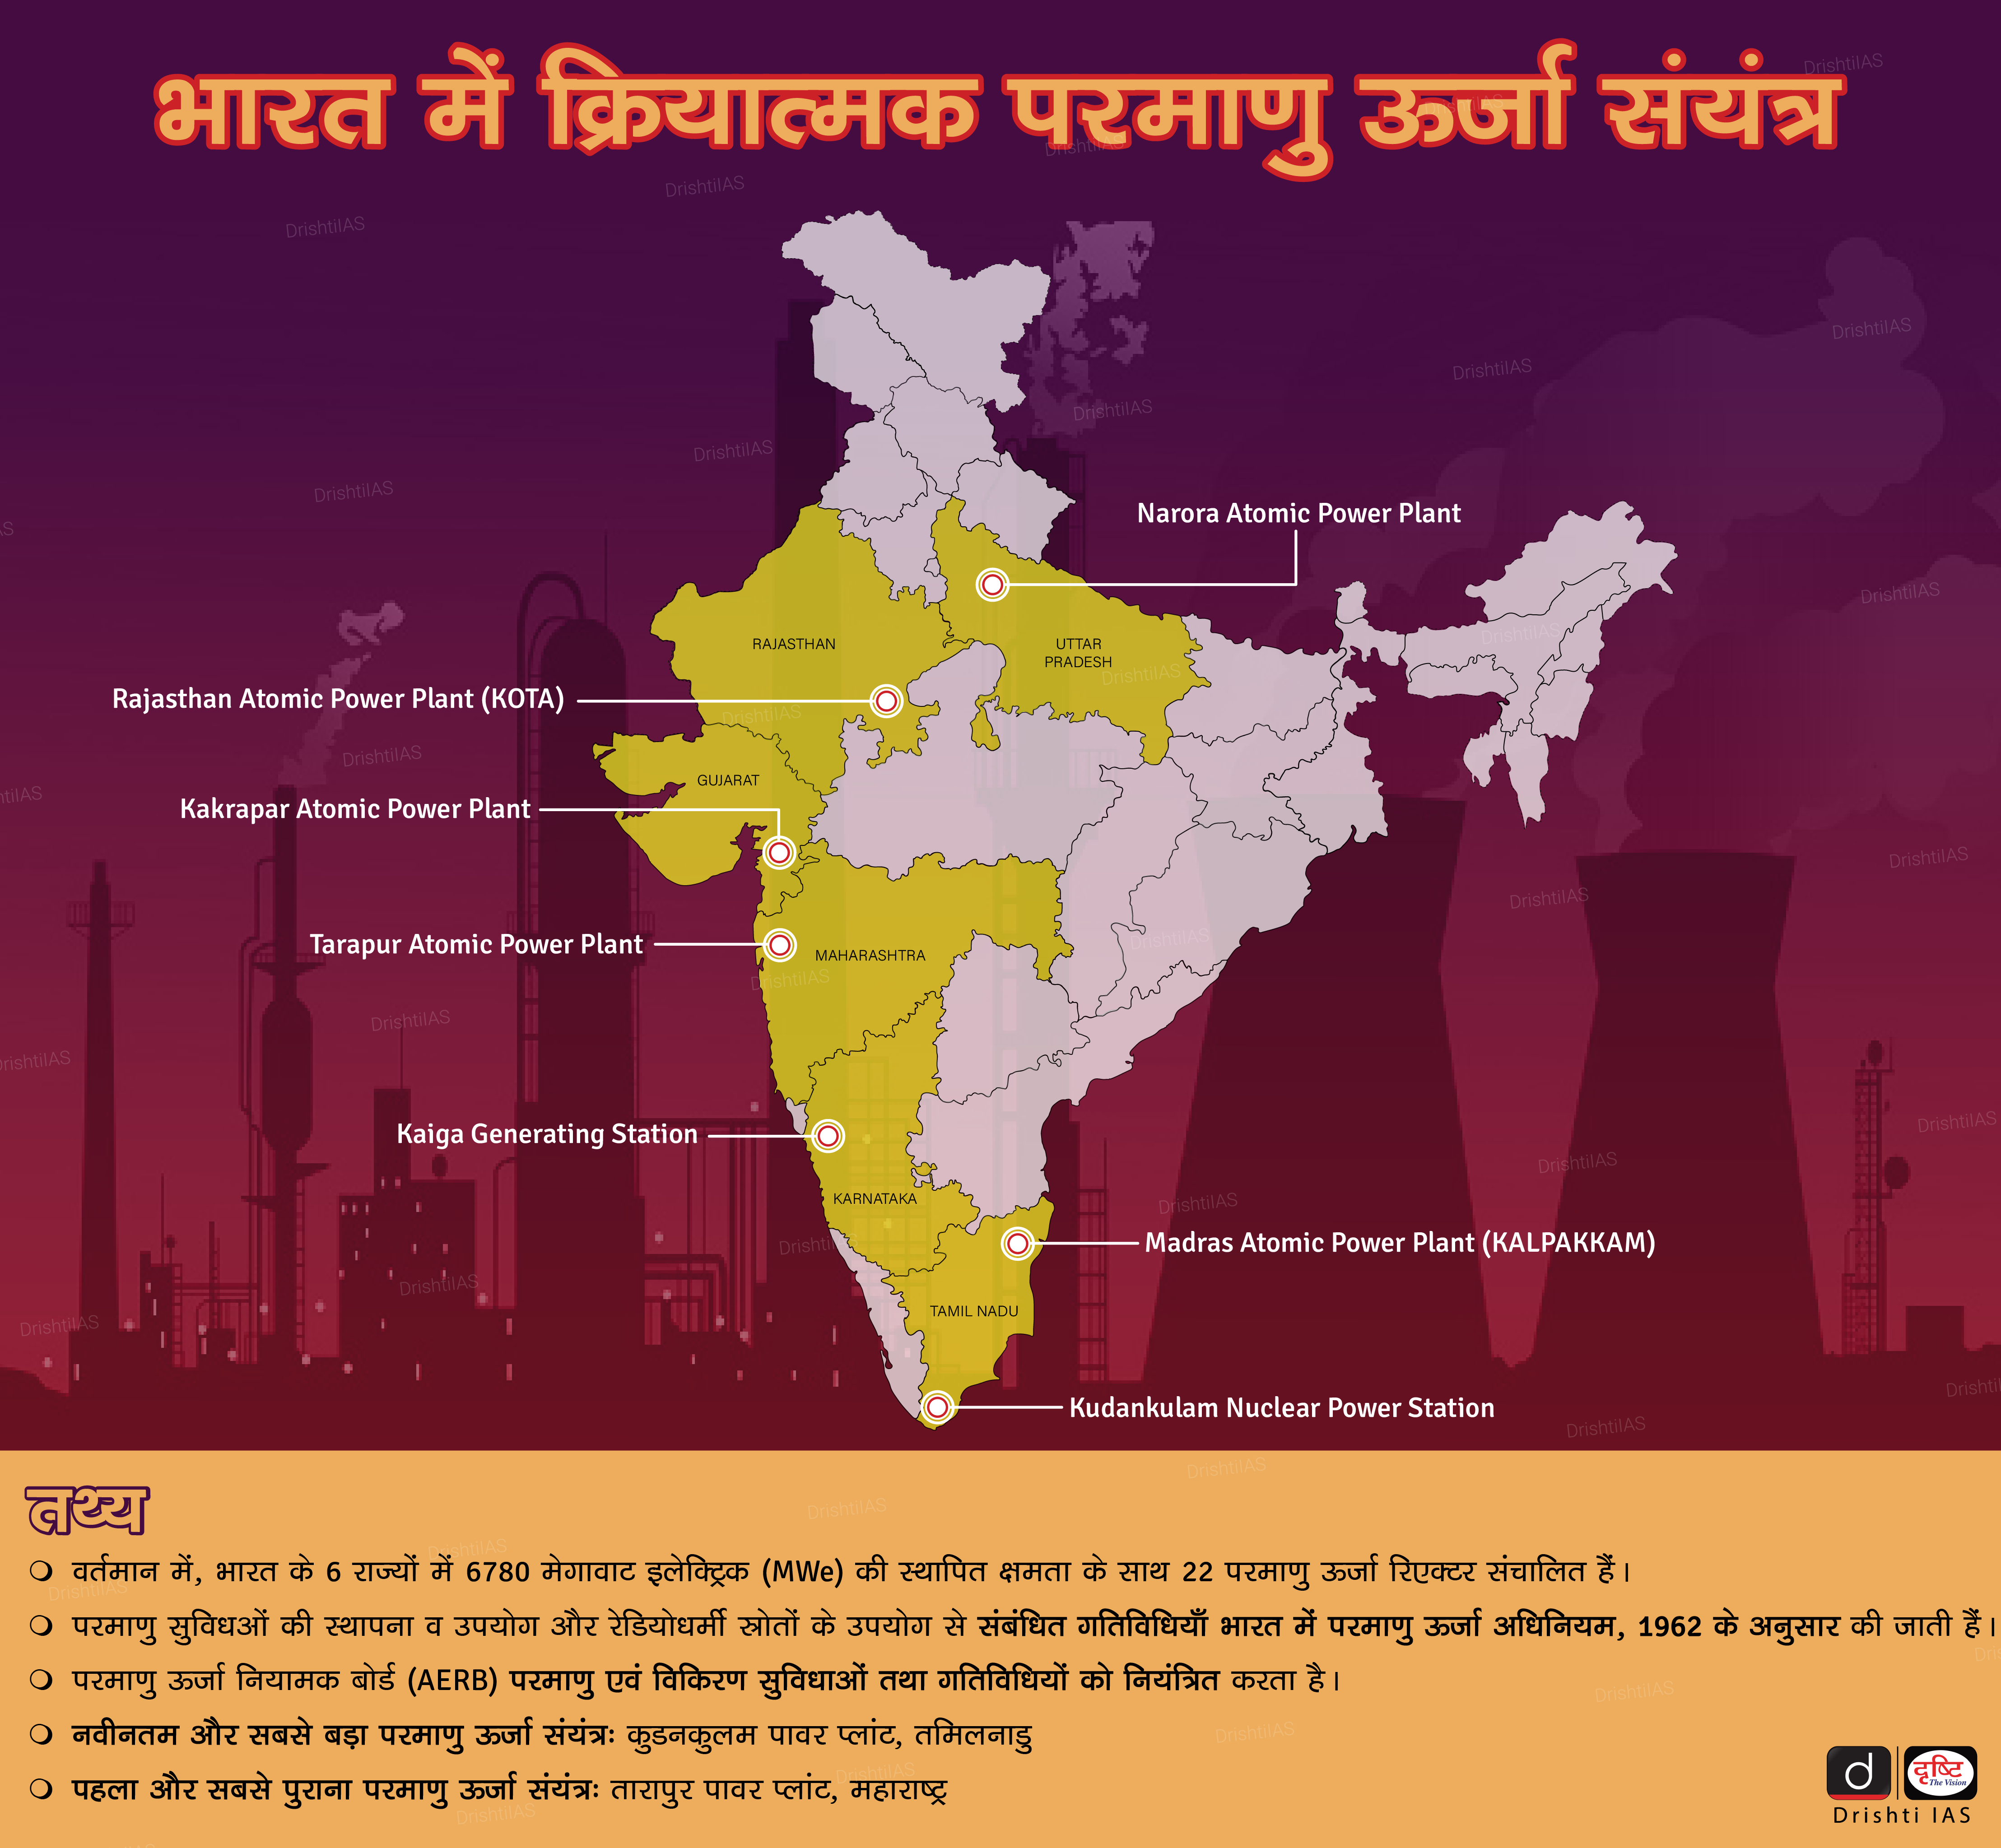 Operational-Nuclear-Power-Plants-in-India